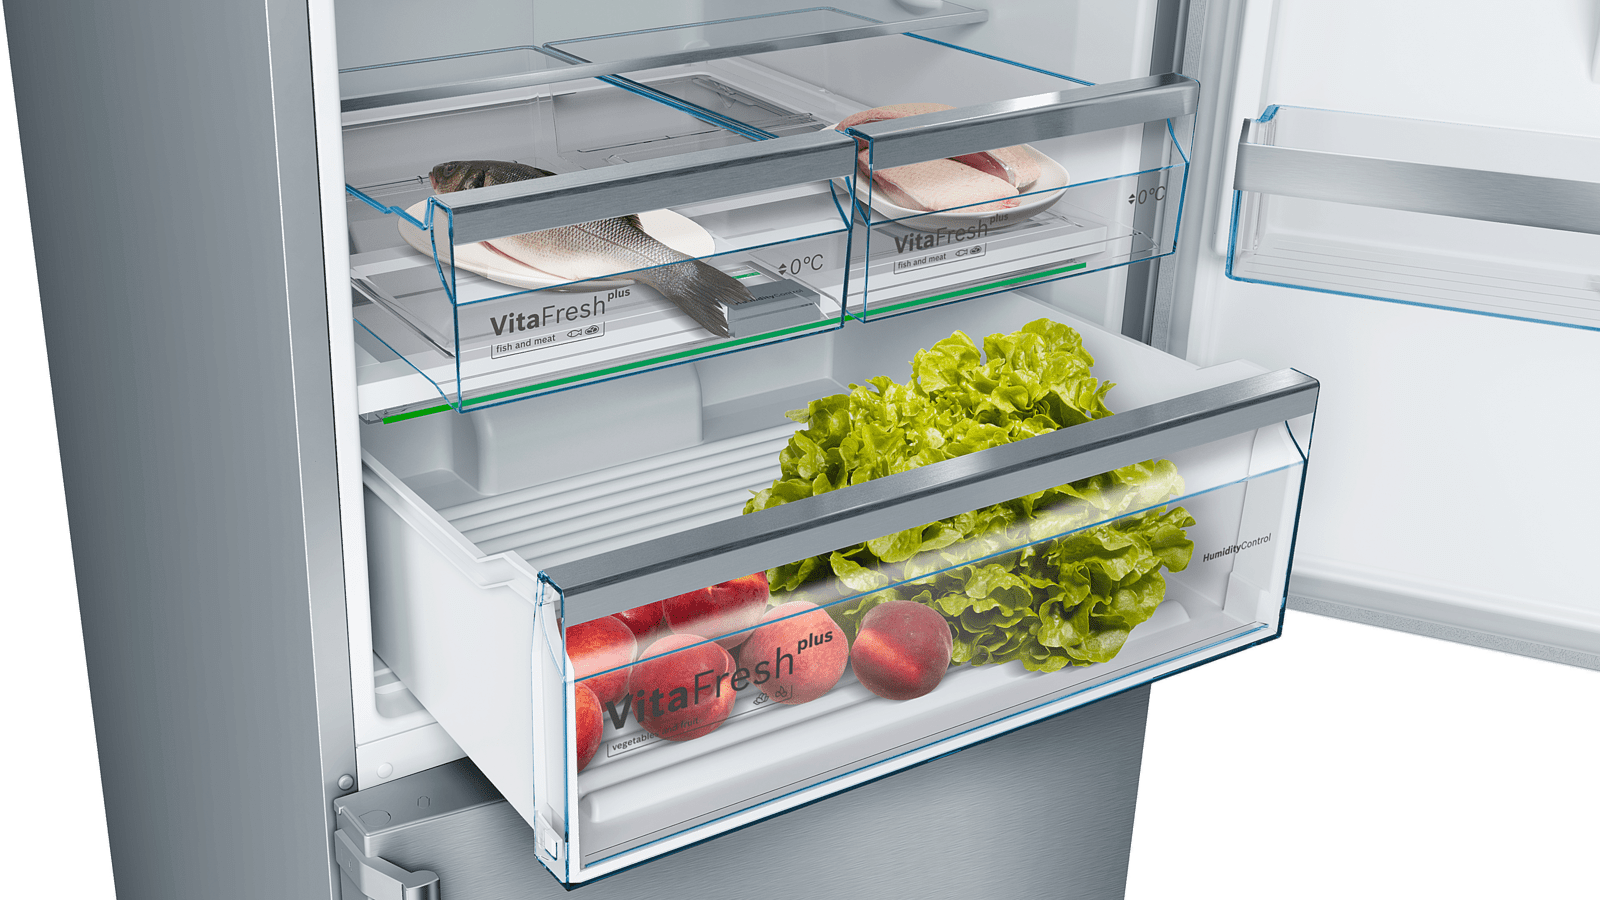 Save frozen foods with SuperCooling